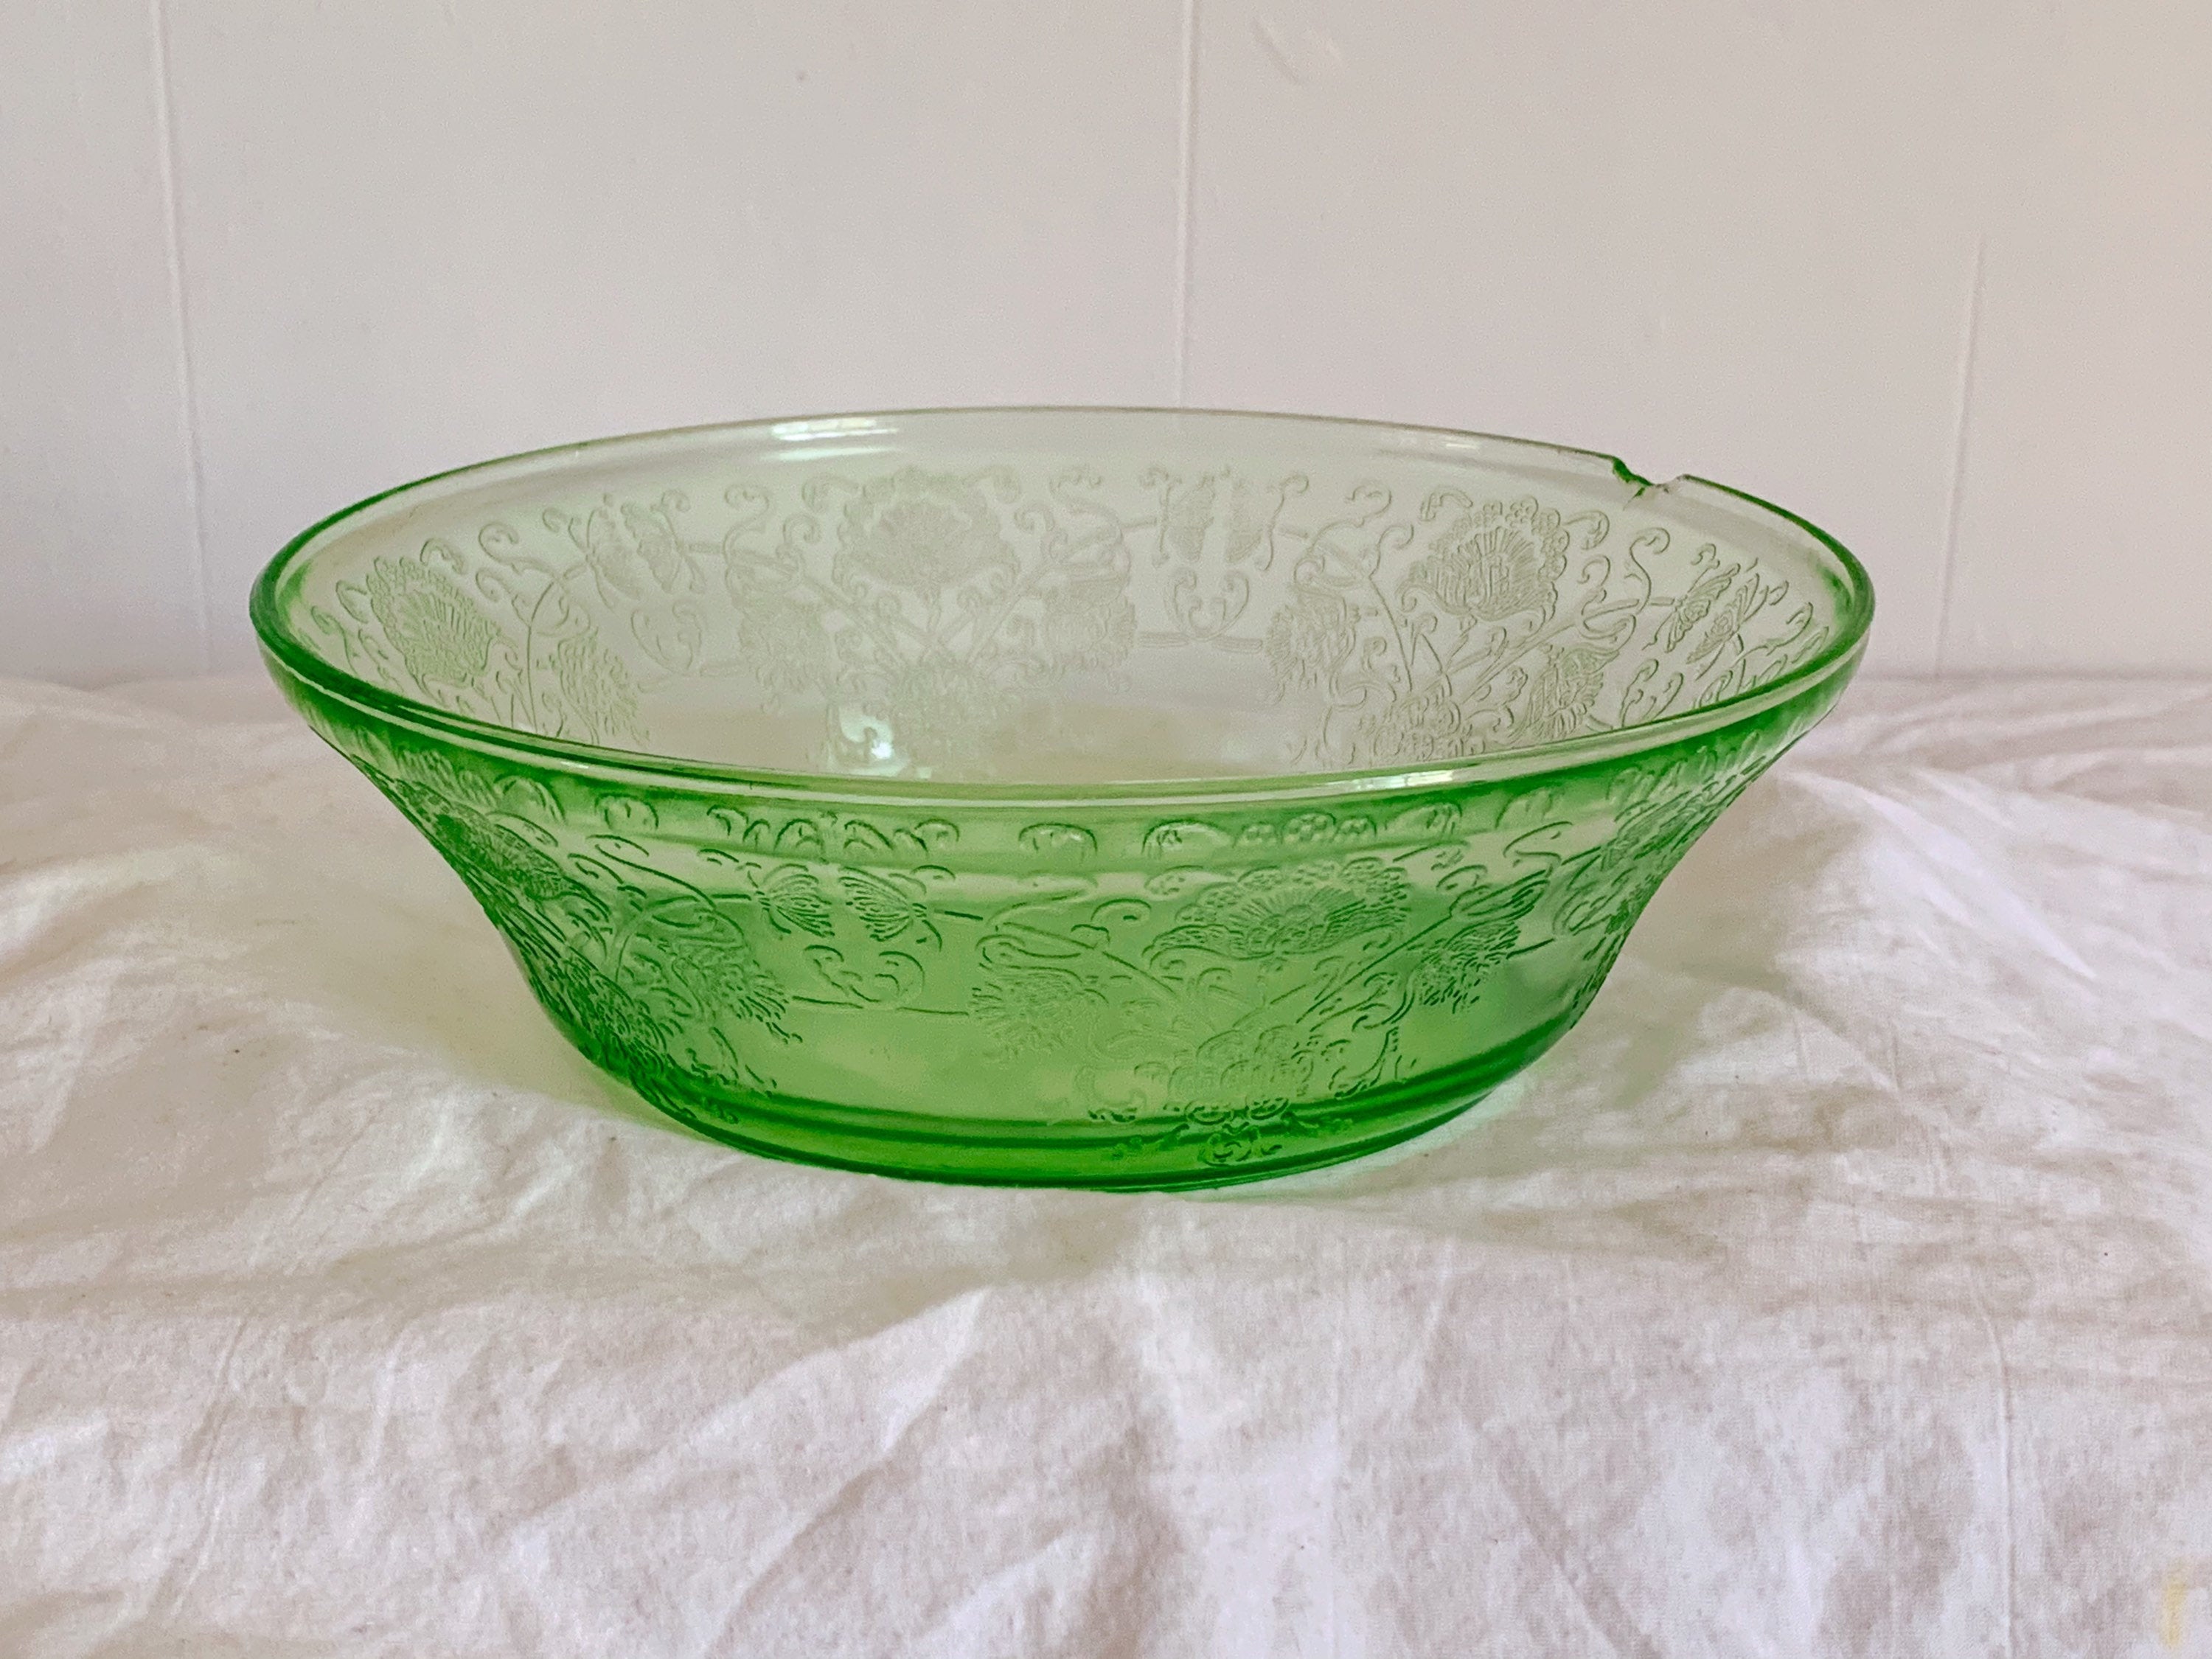 Variety of Vintage 1930s Green Depression Glass Serving Bowls, Plates, Dessert Platter and Cup